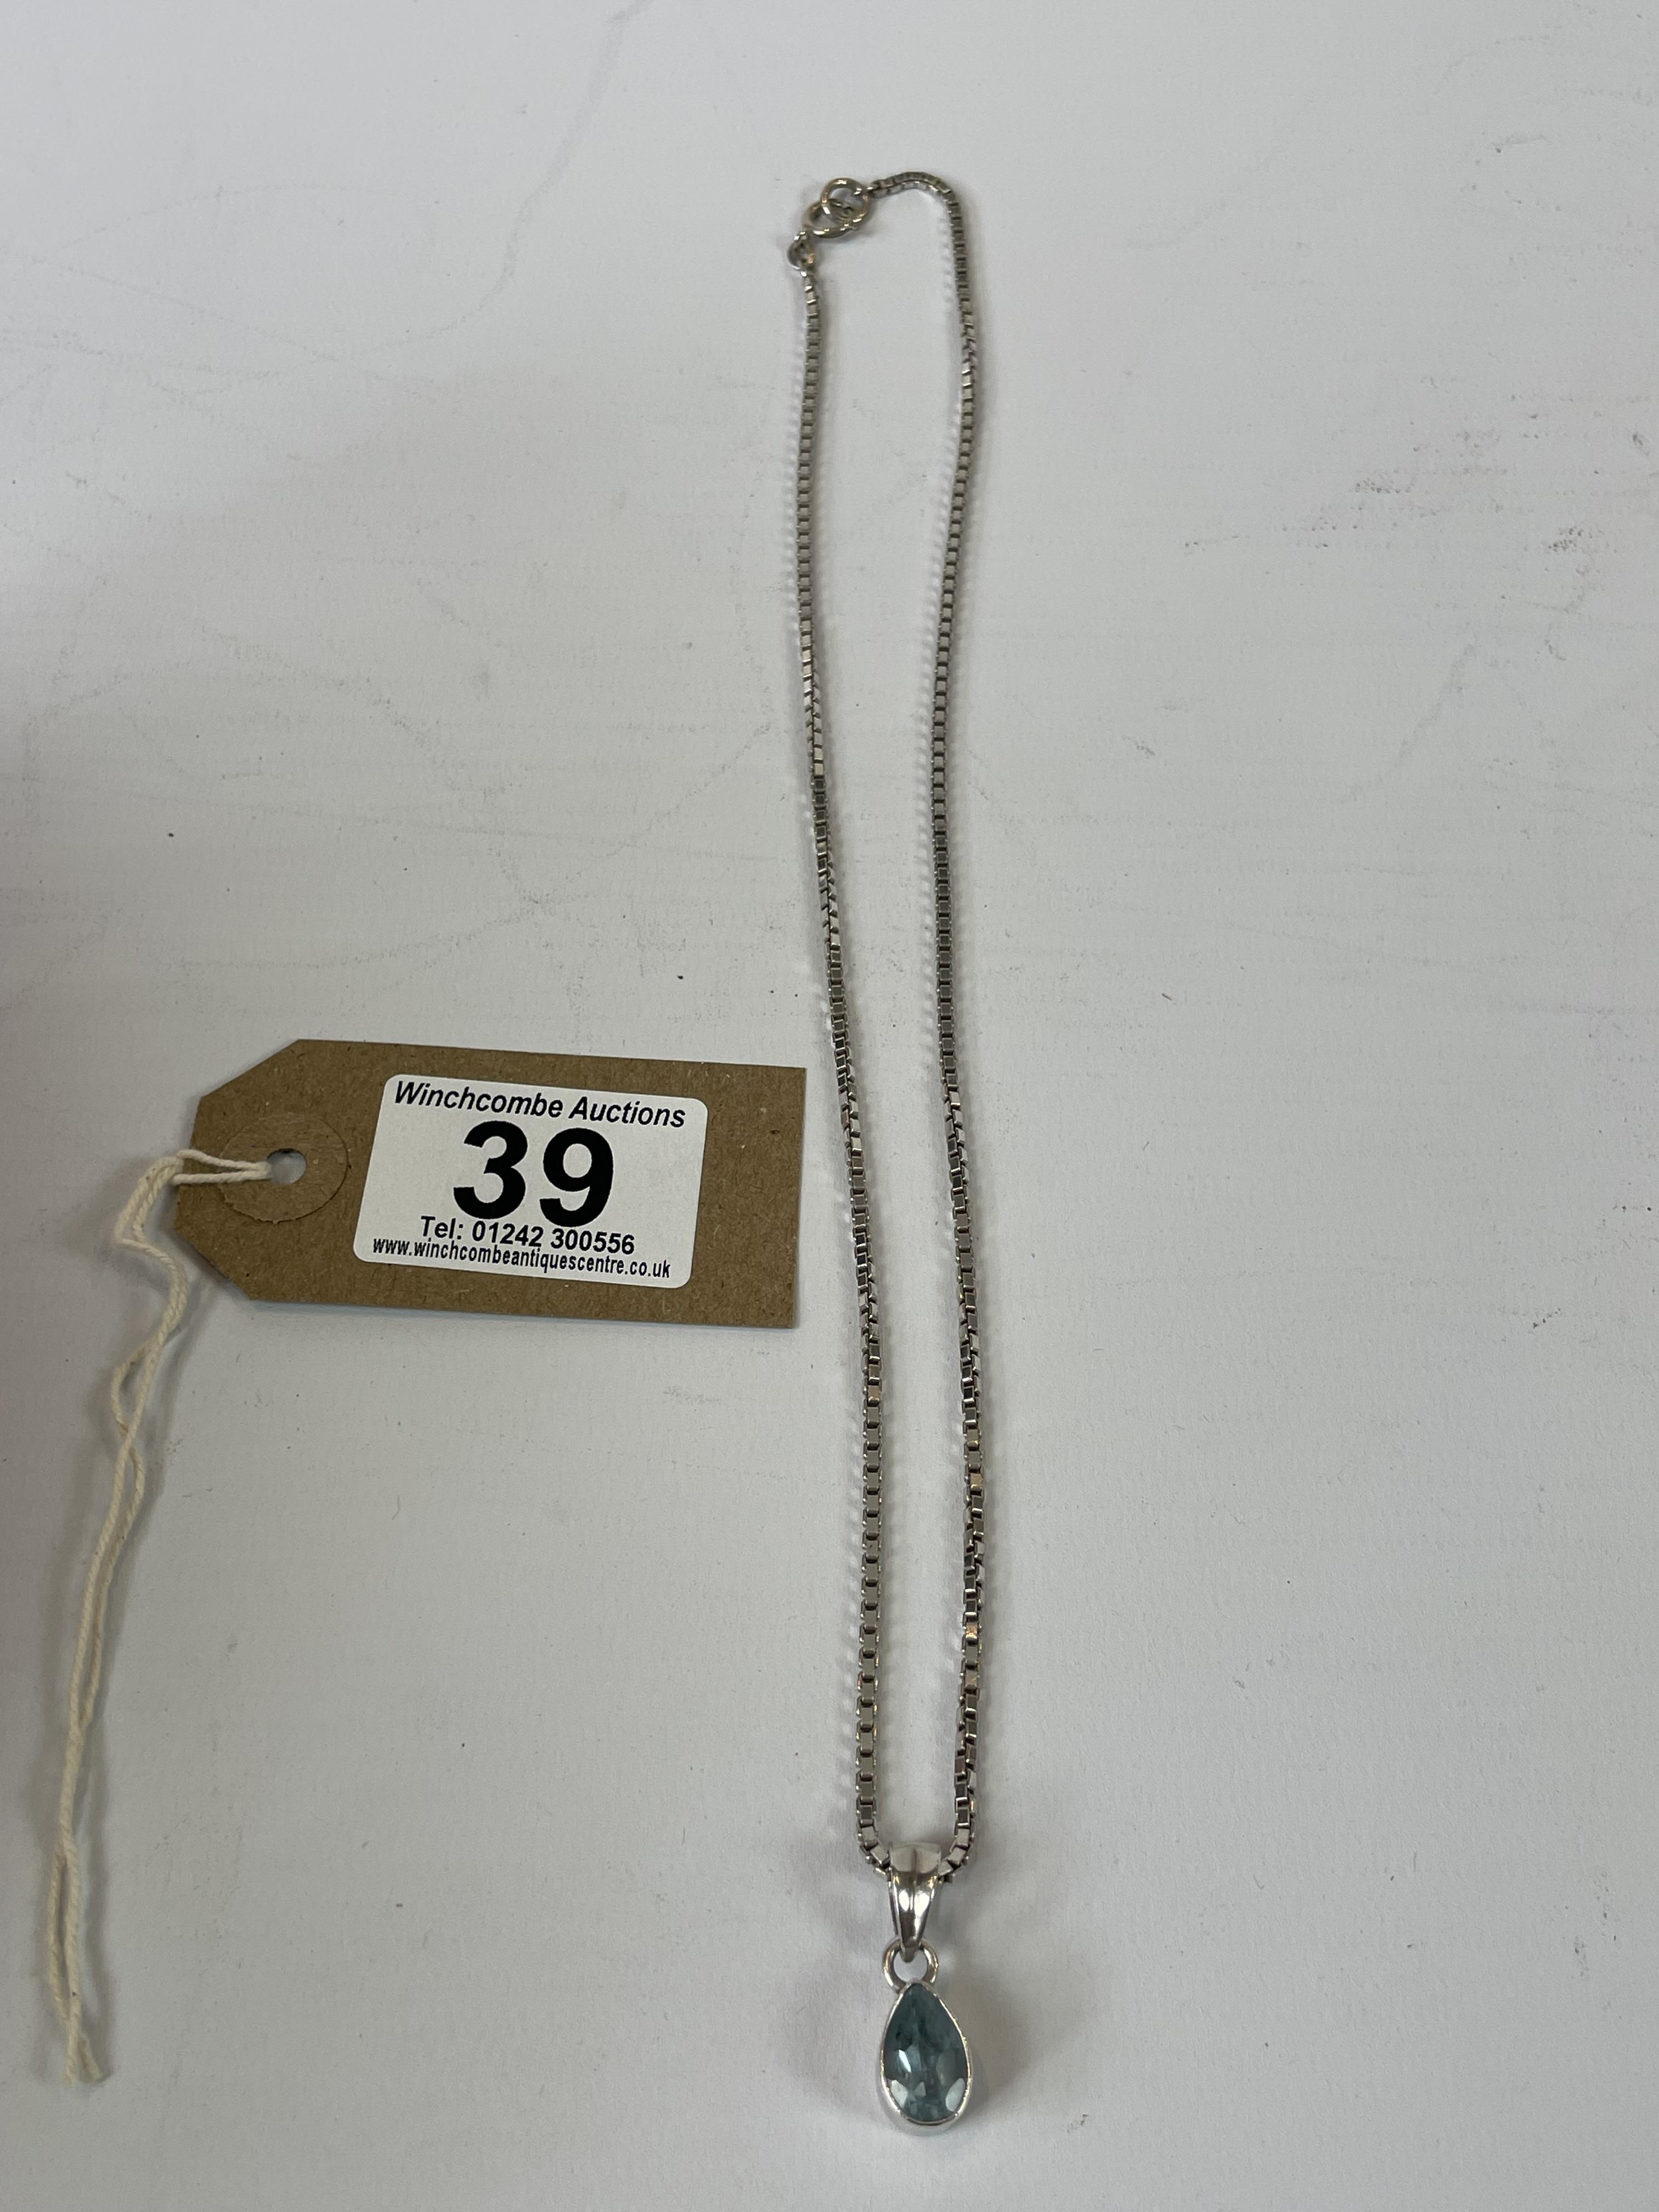 heavy silver chain necklace with pendant in silver casing